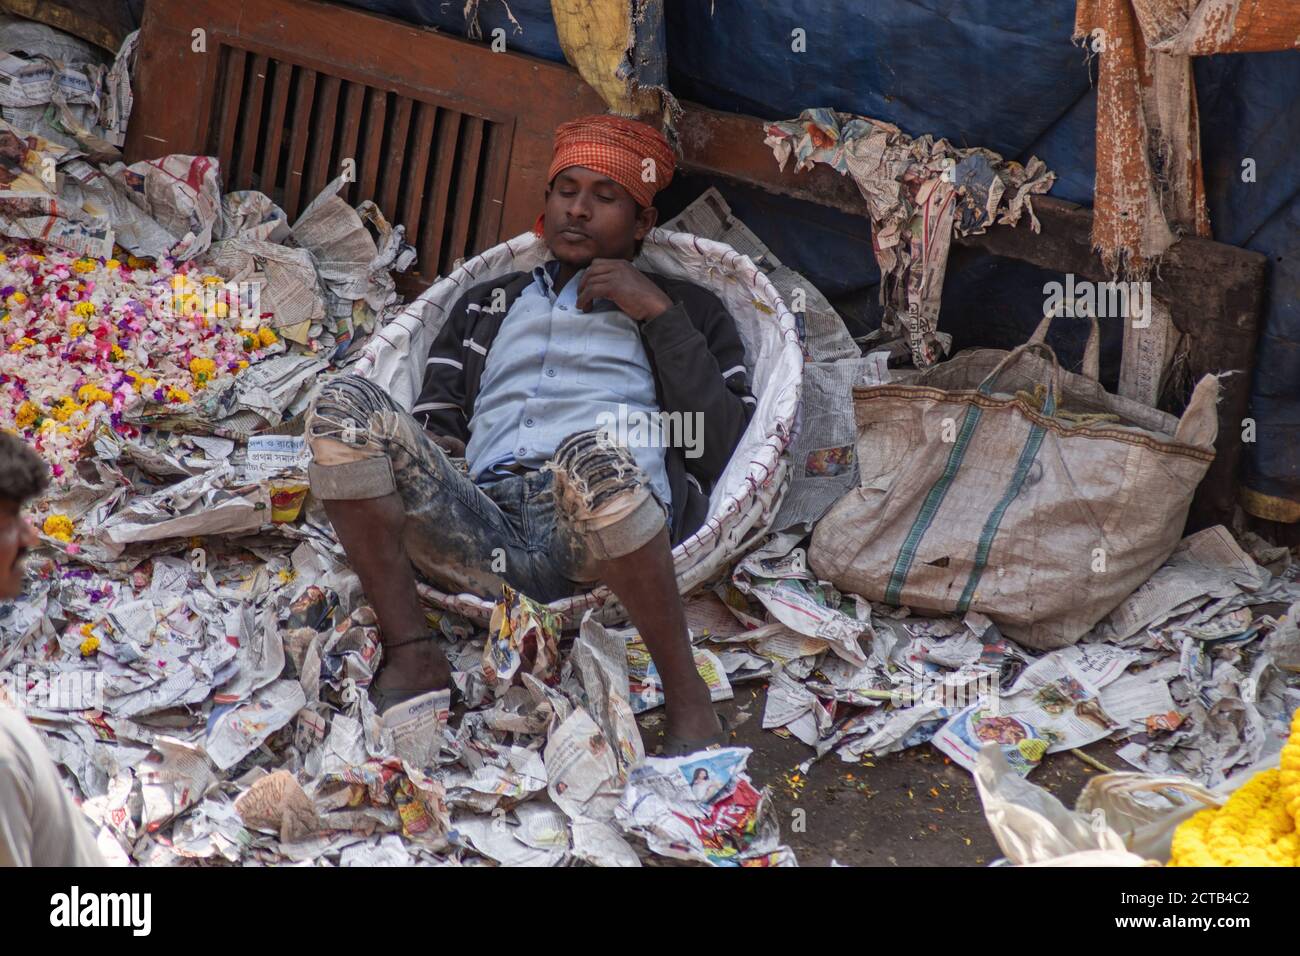 Kolkata, India - February 2, 2020: An unidentified man sleeps and rests on a lot of newspaper at Mallick Ghat flower market on February 2, 2020 Stock Photo